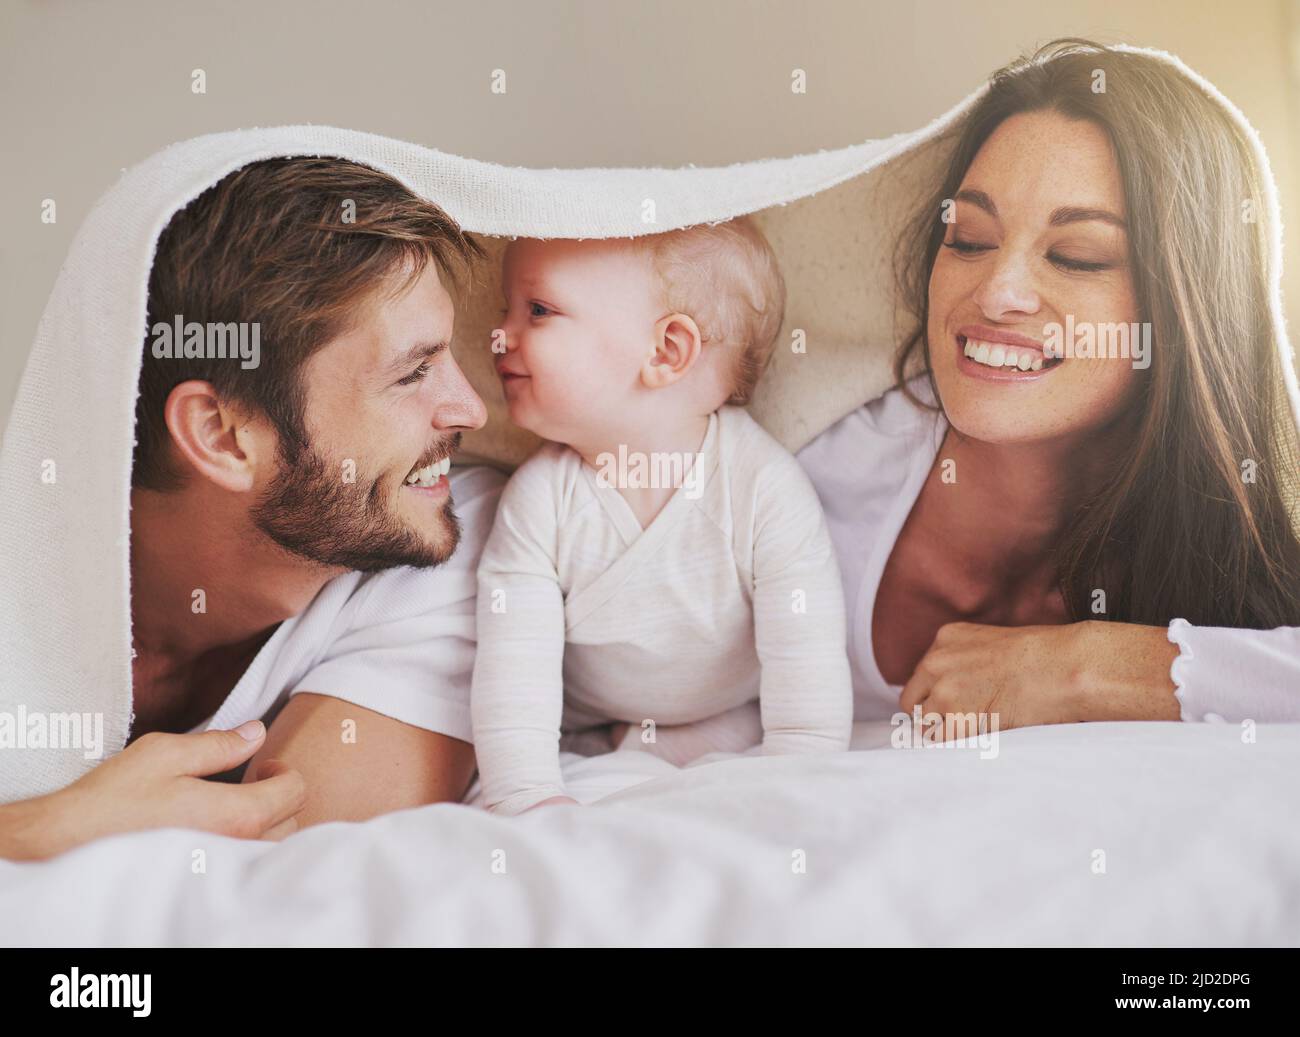 Shes daddys little girl. Cropped shot of a young couple and their baby daughter in the bedroom. Stock Photo